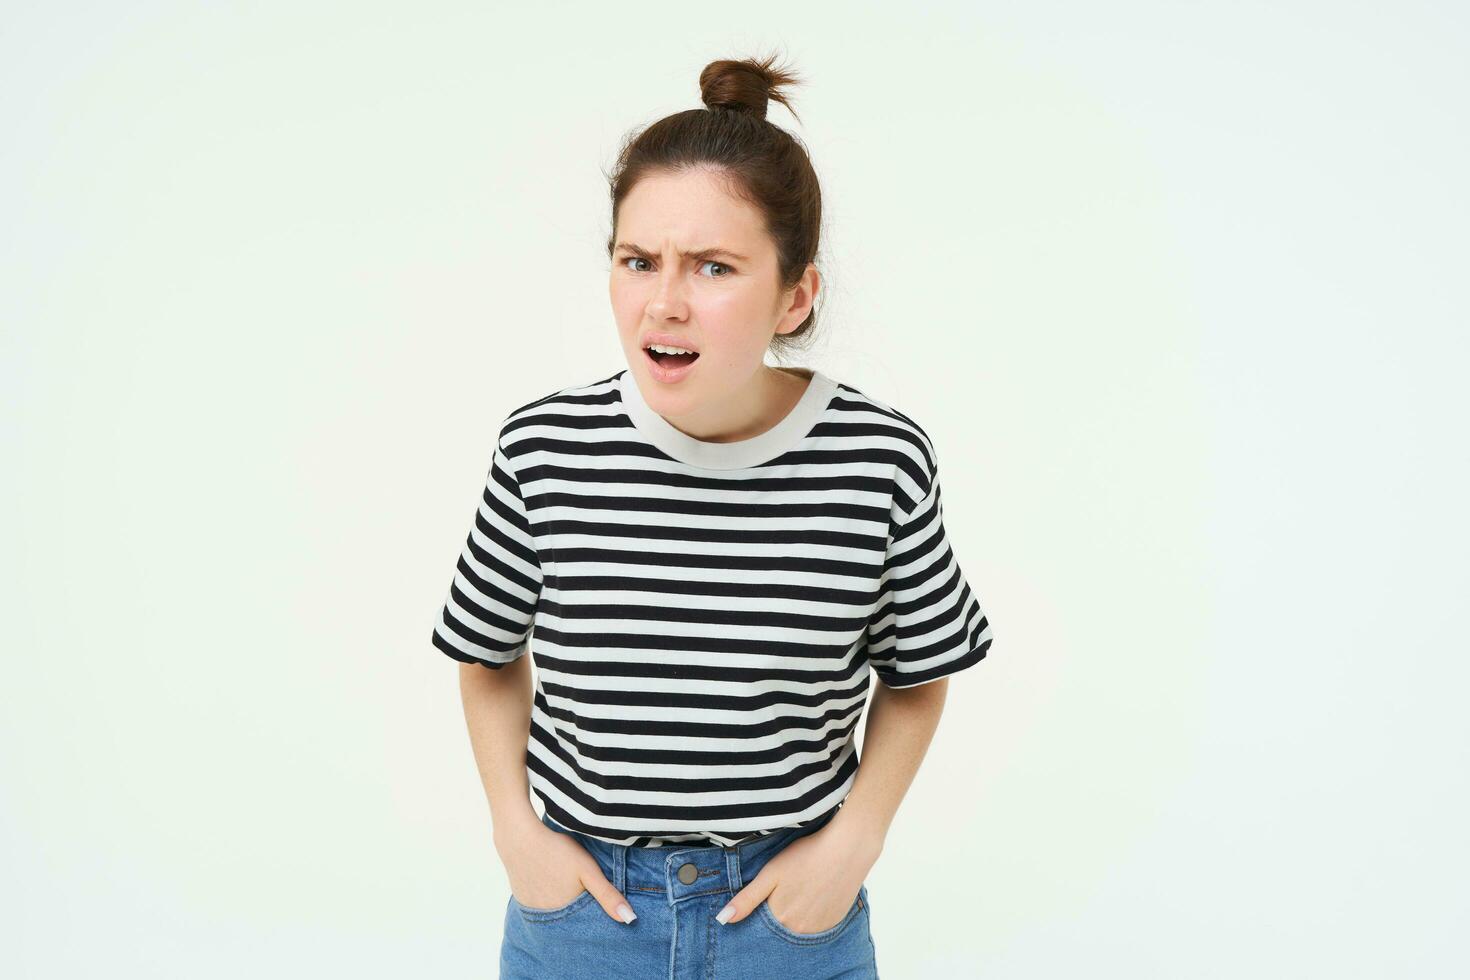 Portrait of young woman with shocked, angry face expression, hear something disappointing, shows negative, frustrated reaction, standing over white background photo